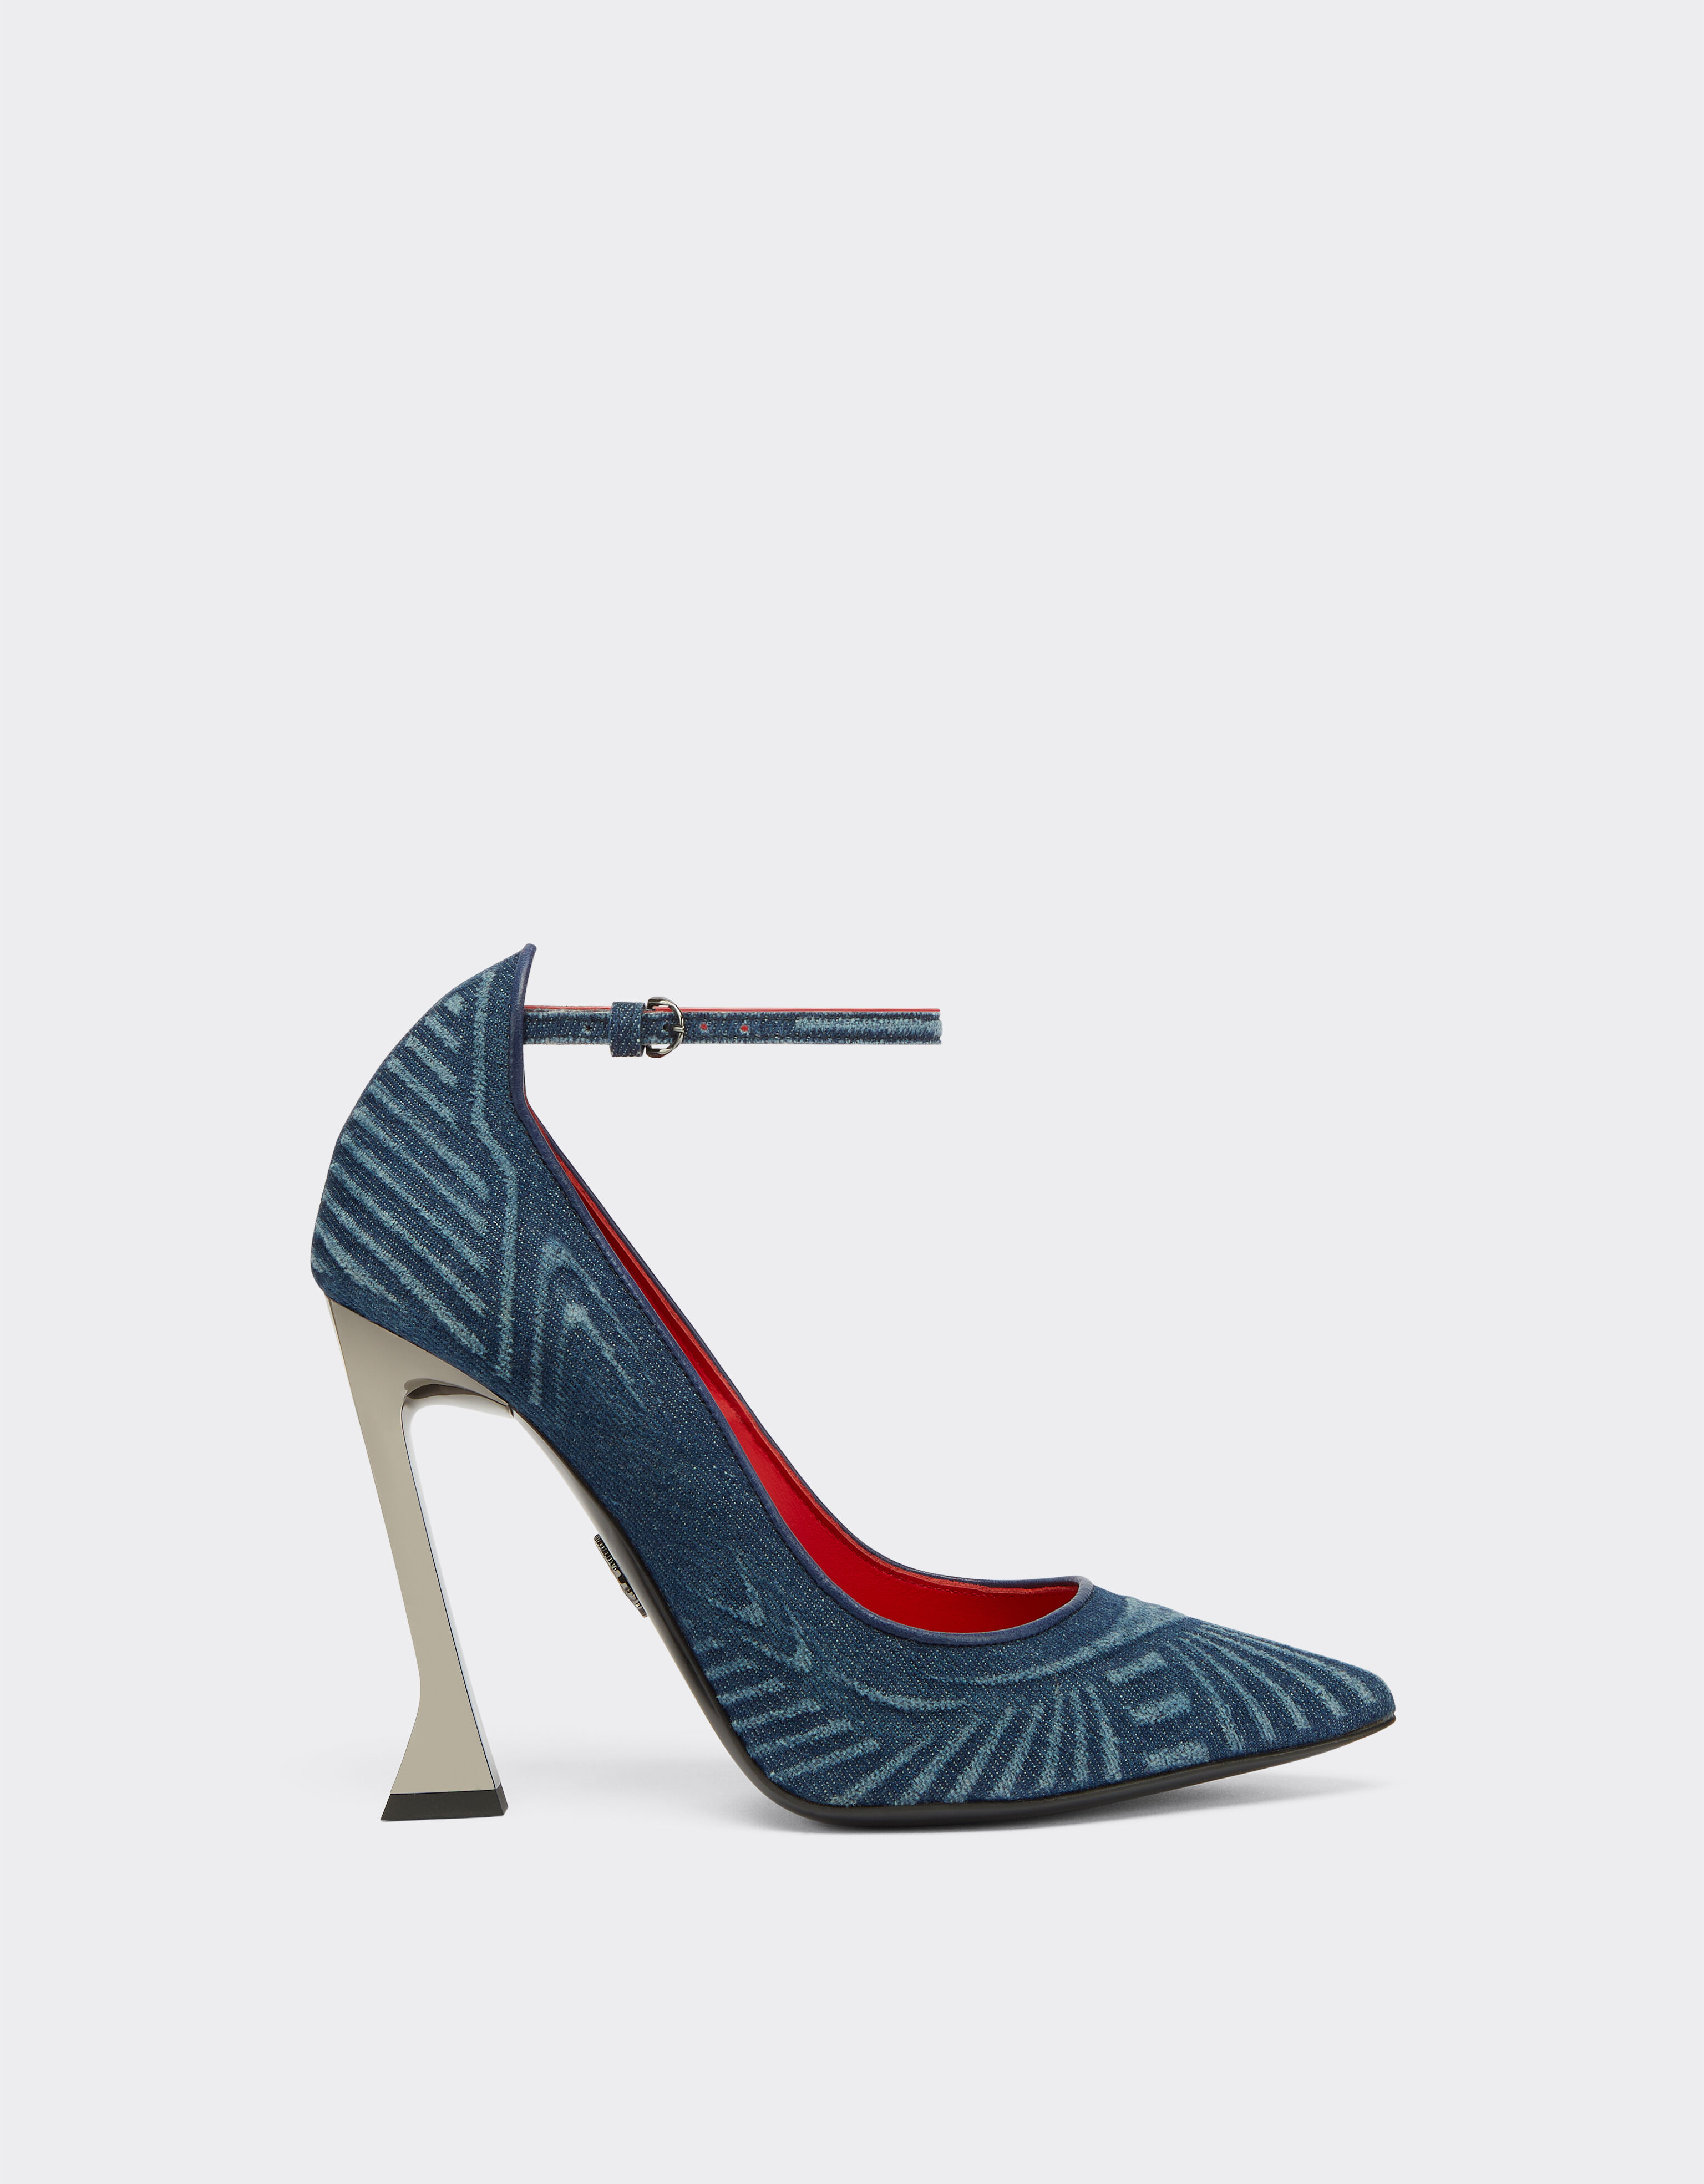 Ferrari Court shoes in denim with strap and livery motif Ingrid 20684f